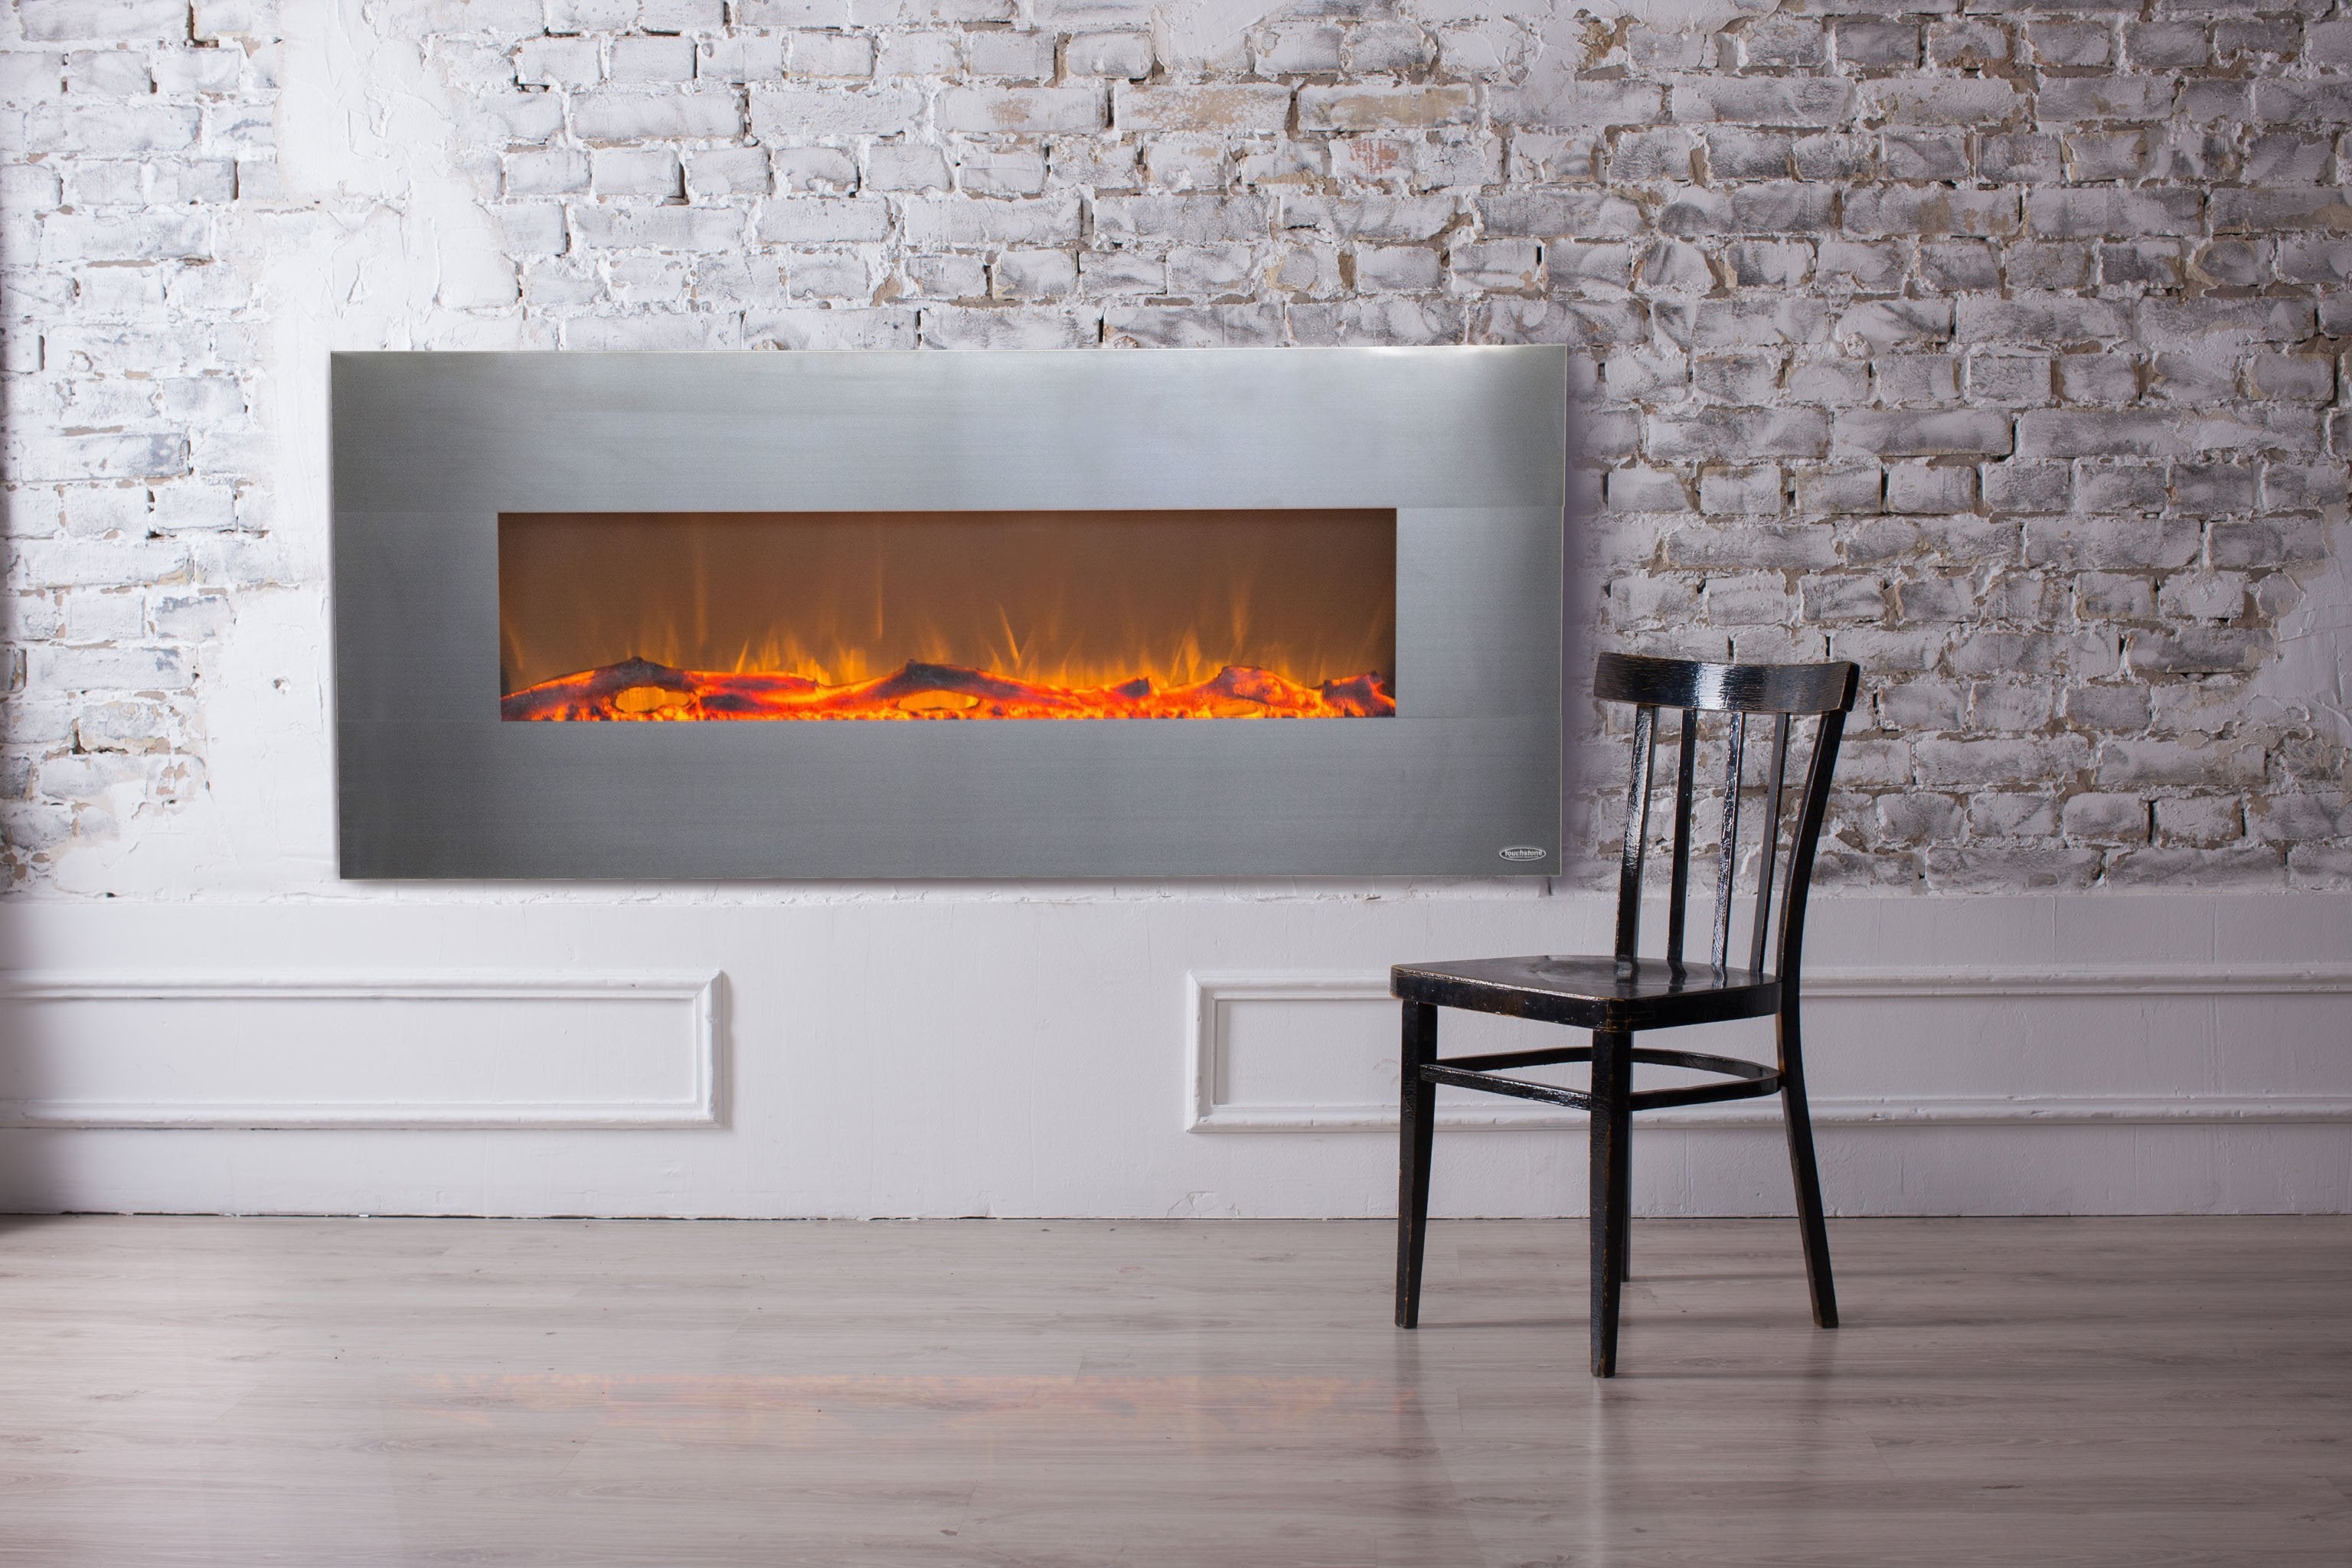 Onyx Stainless 80026  Refurbished Wall Mounted Electric Fireplace brick wall.